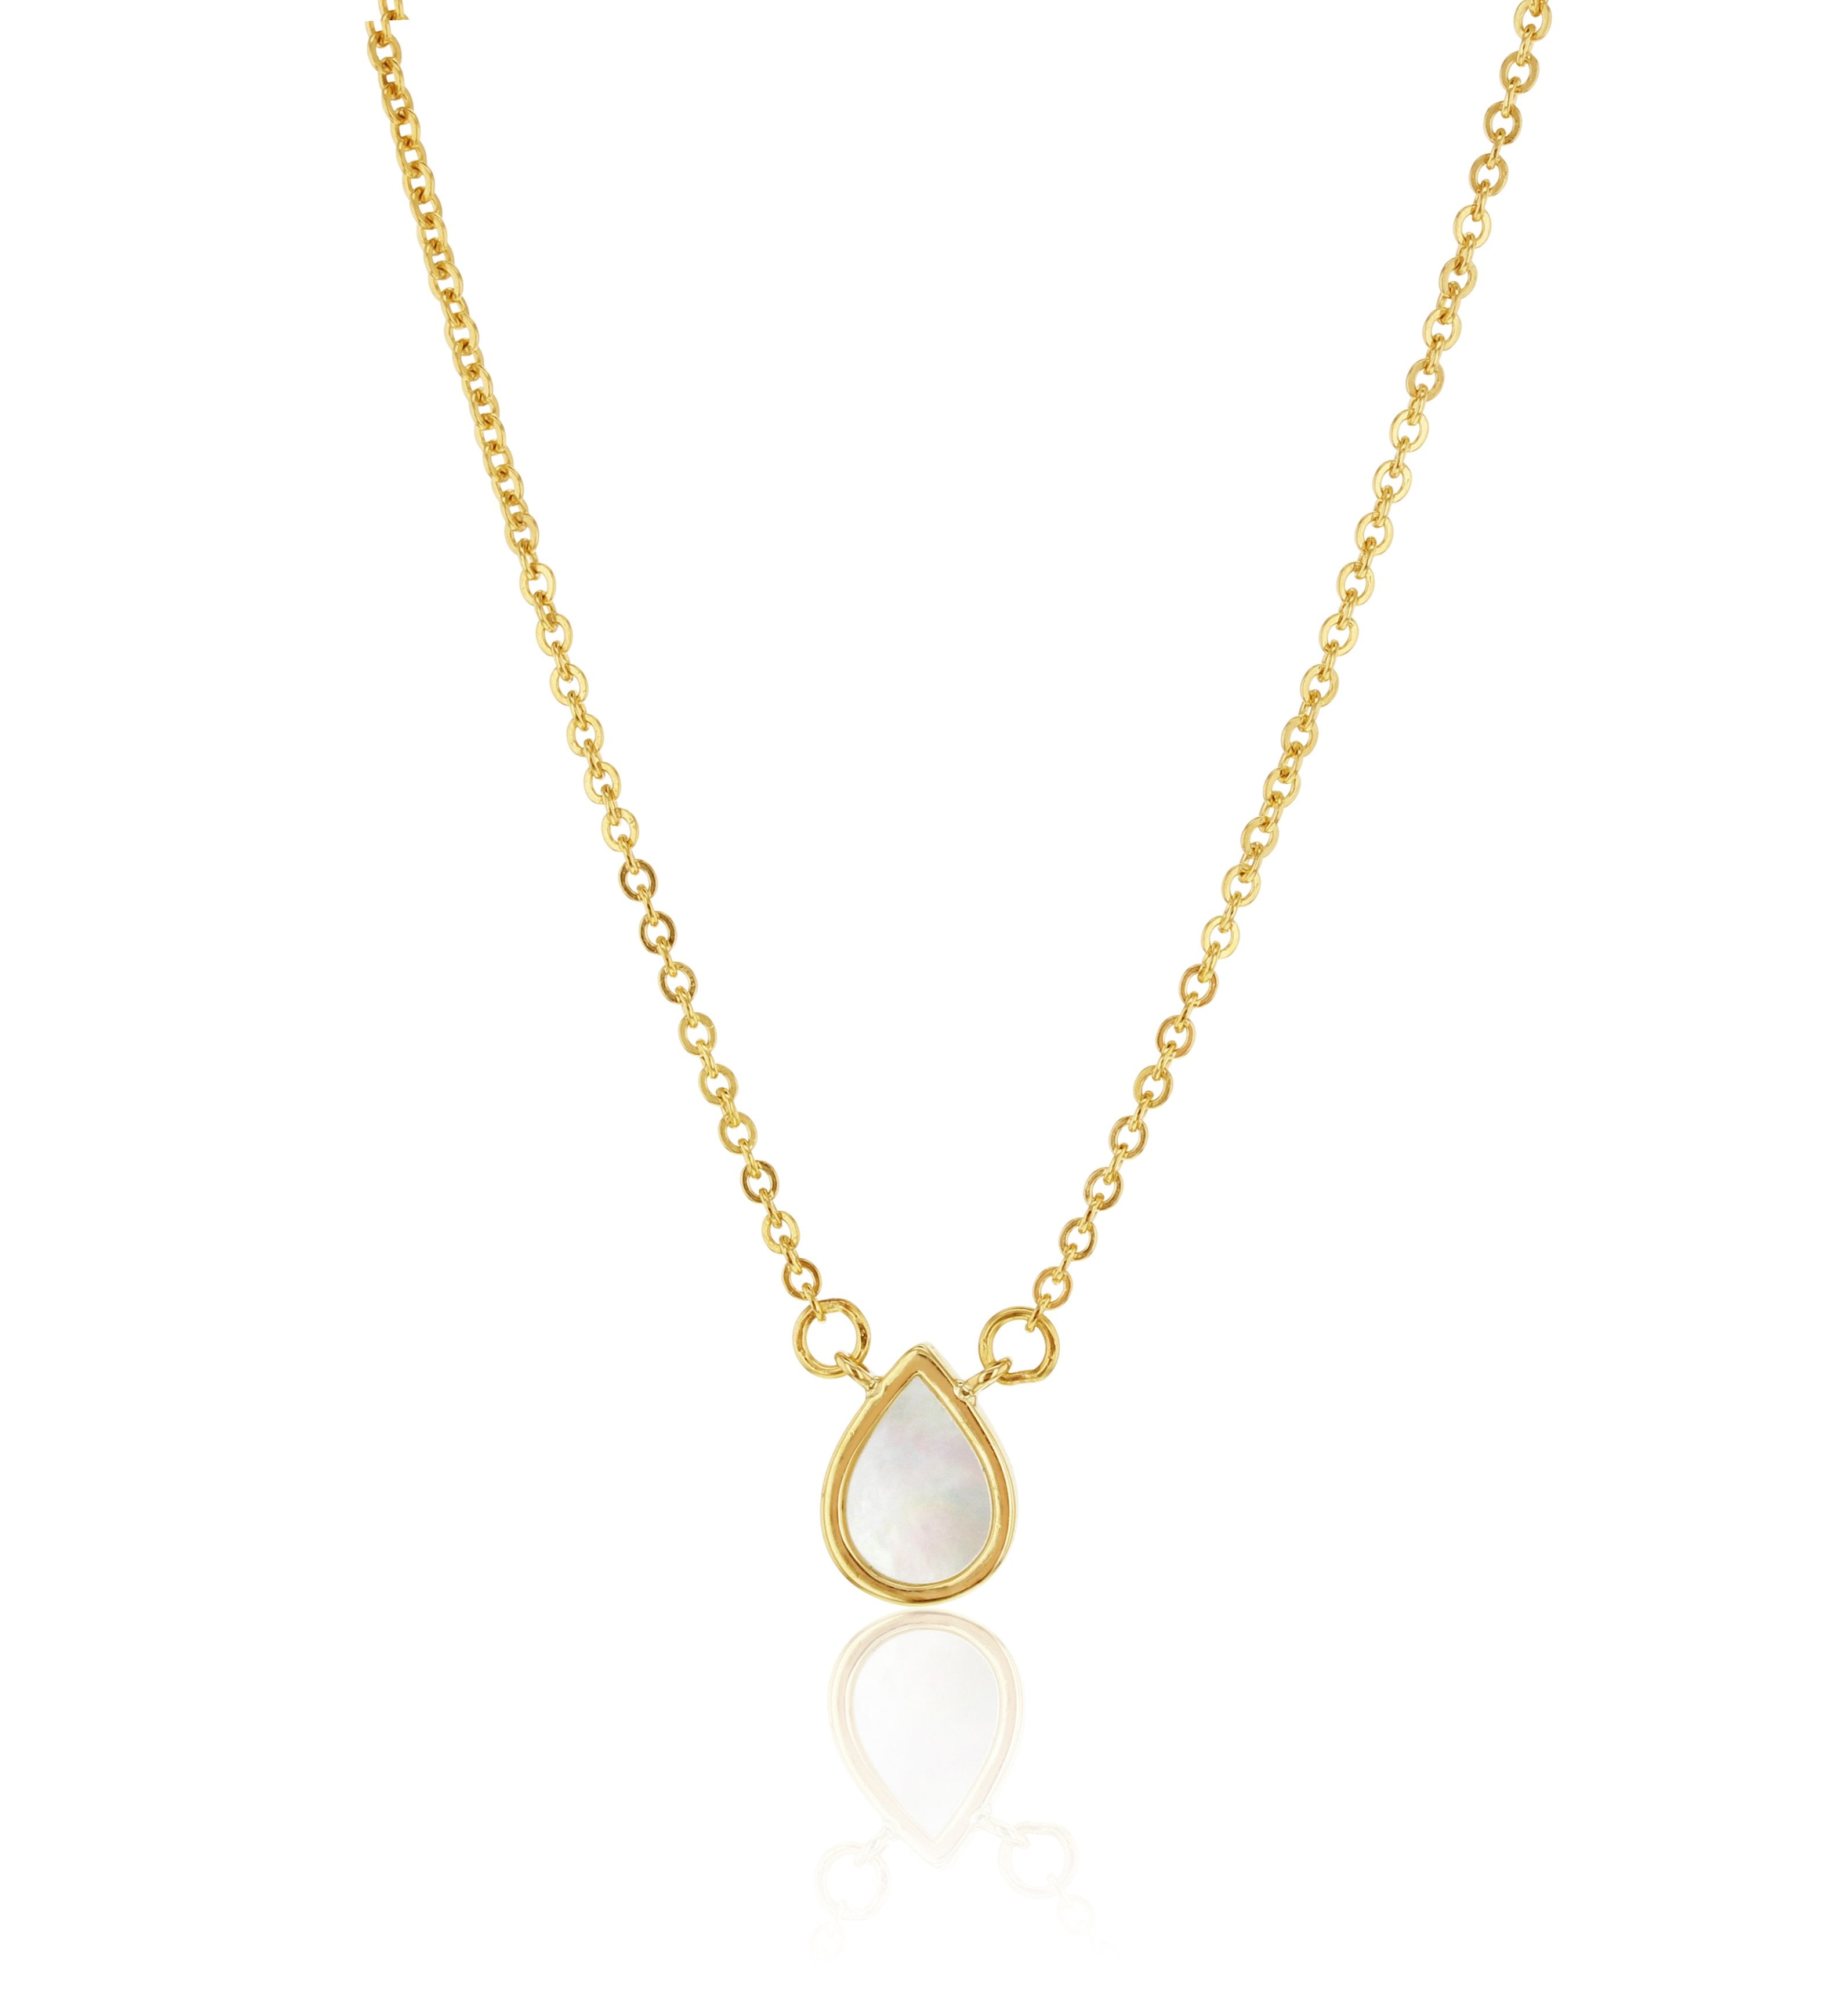 9ct yellow gold mother of pearl necklet